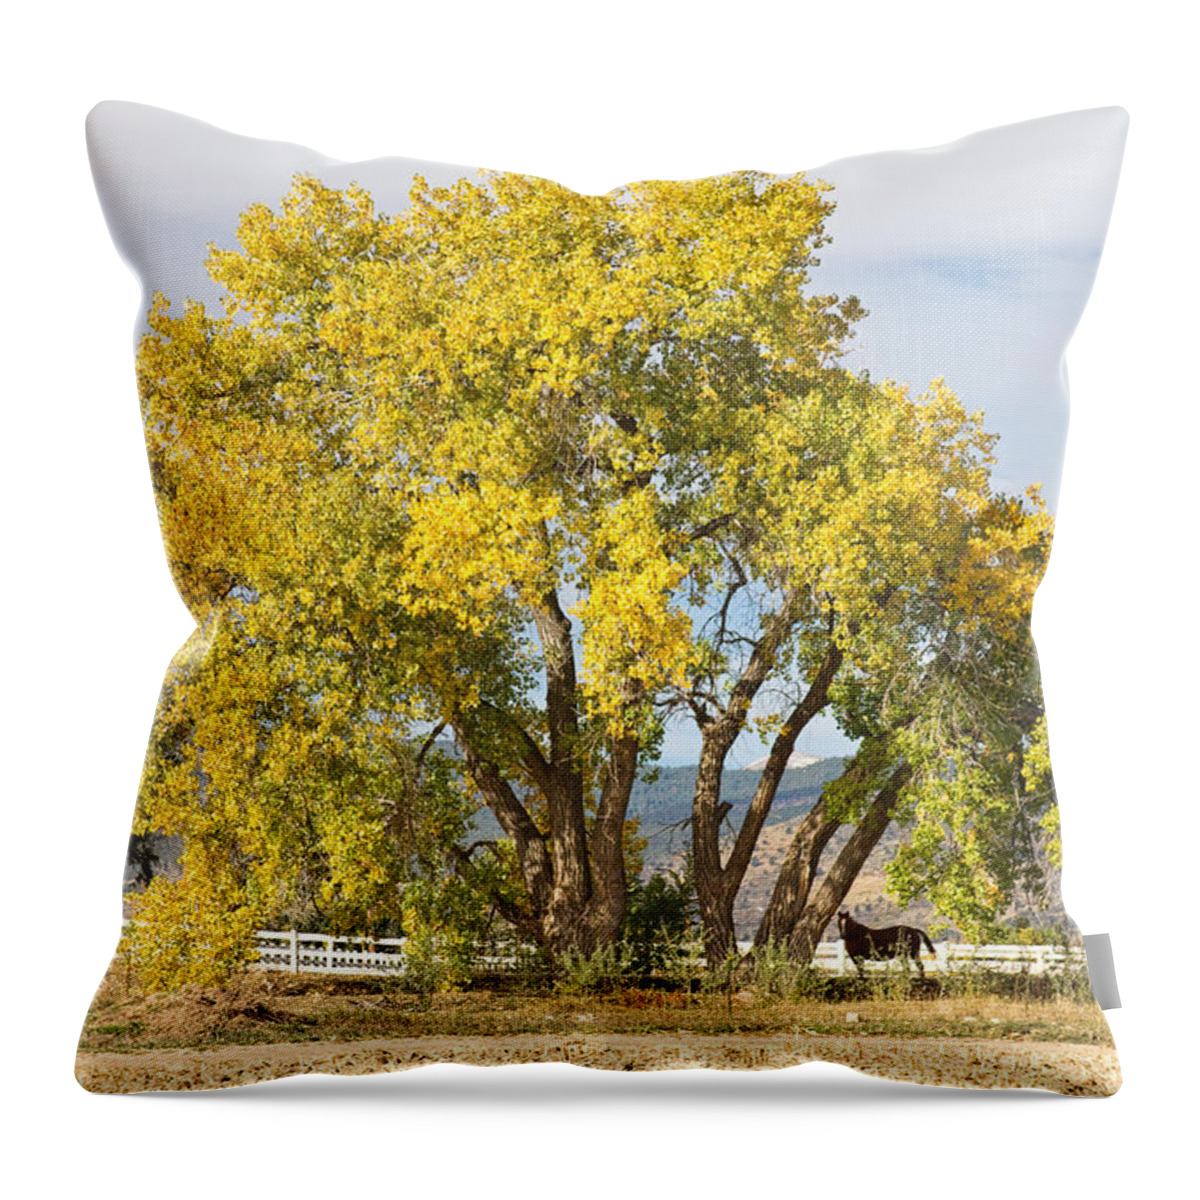 Horse Throw Pillow featuring the photograph Two Country Horses Autumn View by James BO Insogna